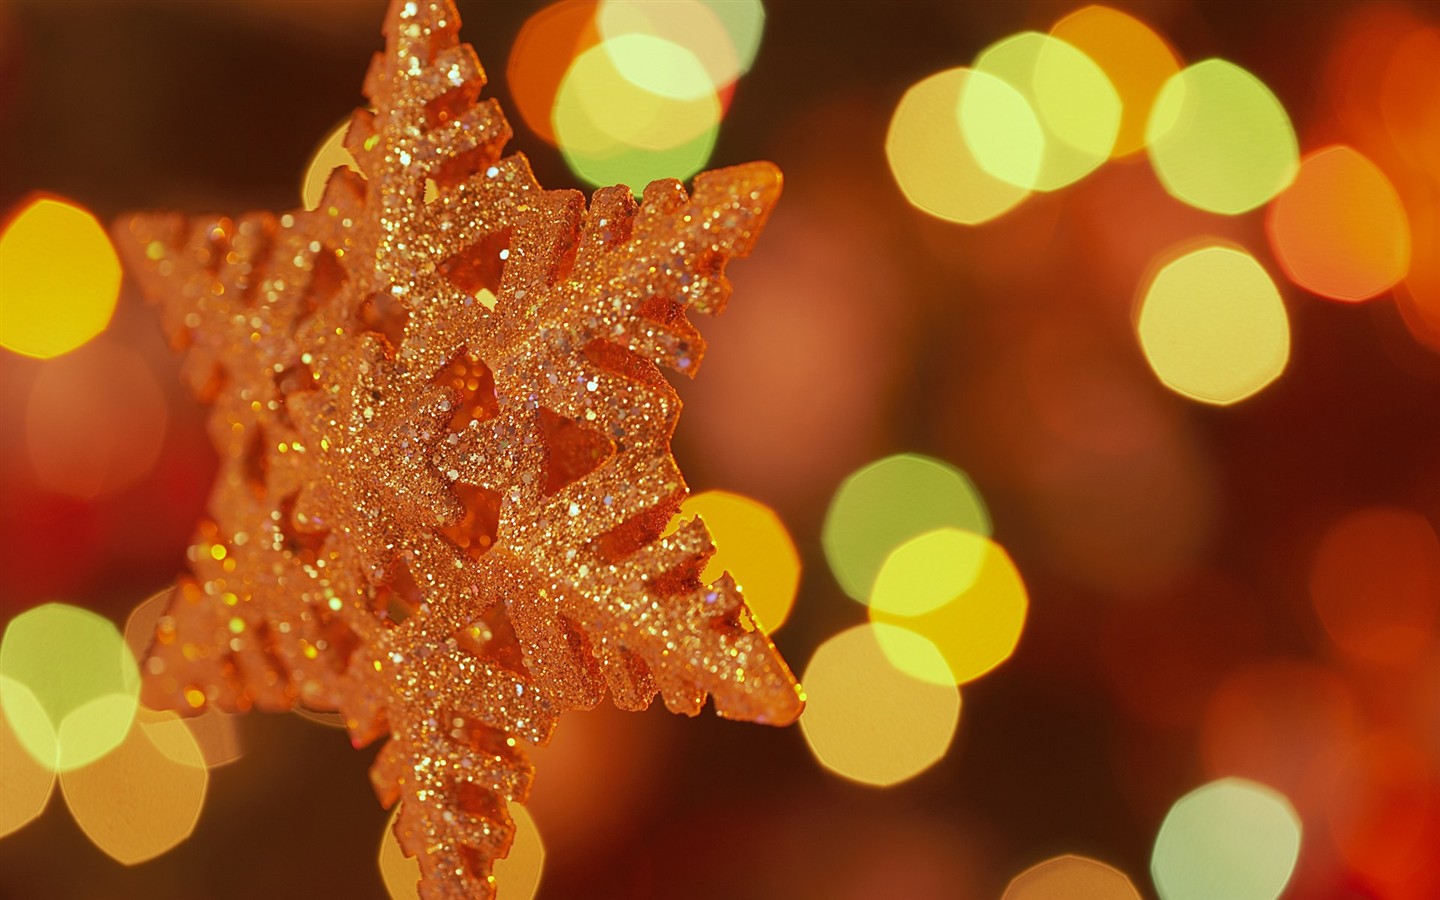 Happy Christmas decorations wallpapers #1 - 1440x900